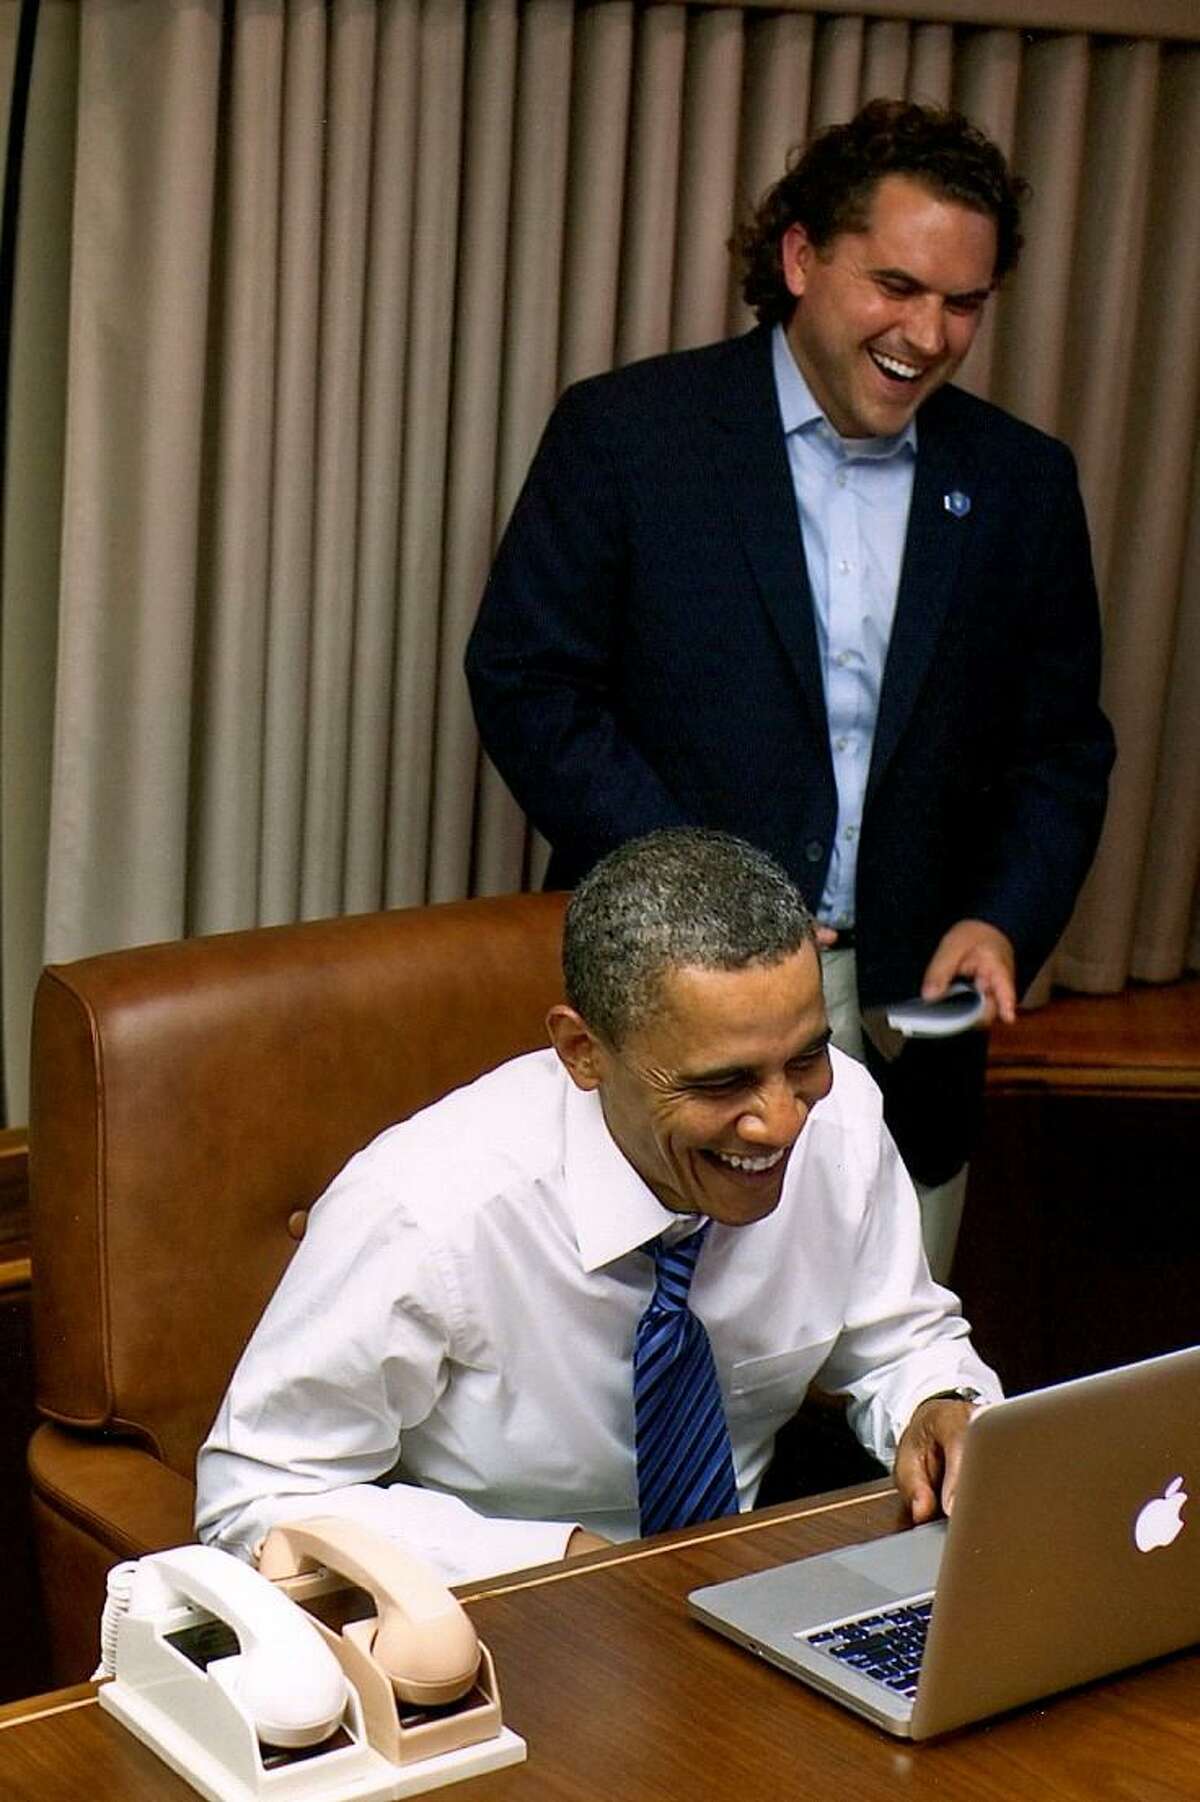 President Obama and Cody Keenan collaborate on Air Force One. April 29, 2011.